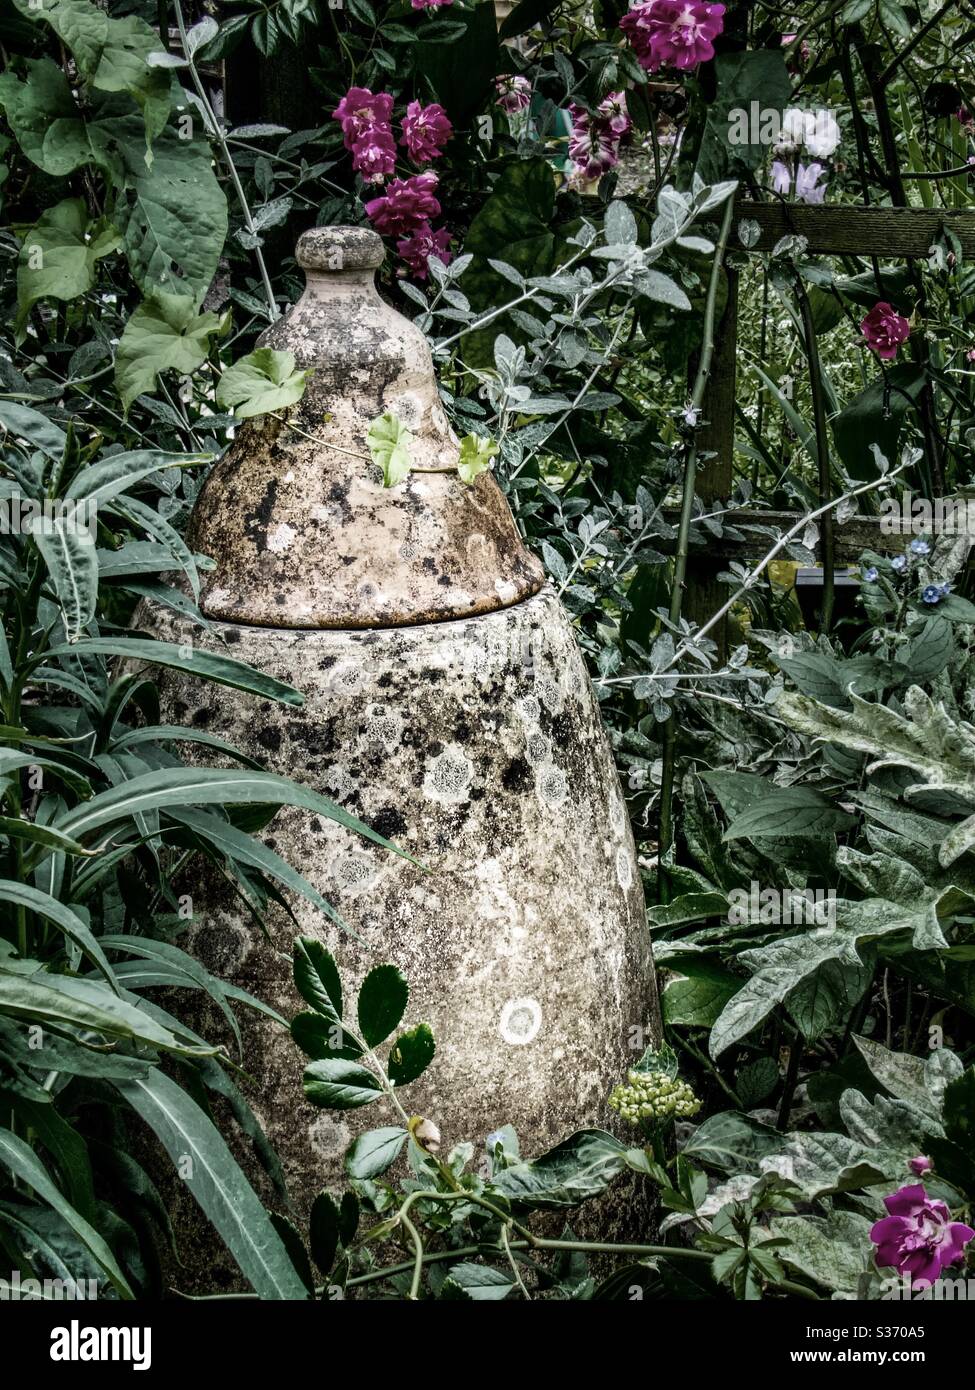 Beautiful large clay jar with rounded body and bell-shaped lid amongst various kinds of plants. Aged surface and faded colour of the jar set against the green of leaves. Flowers add dashes of purple. Stock Photo